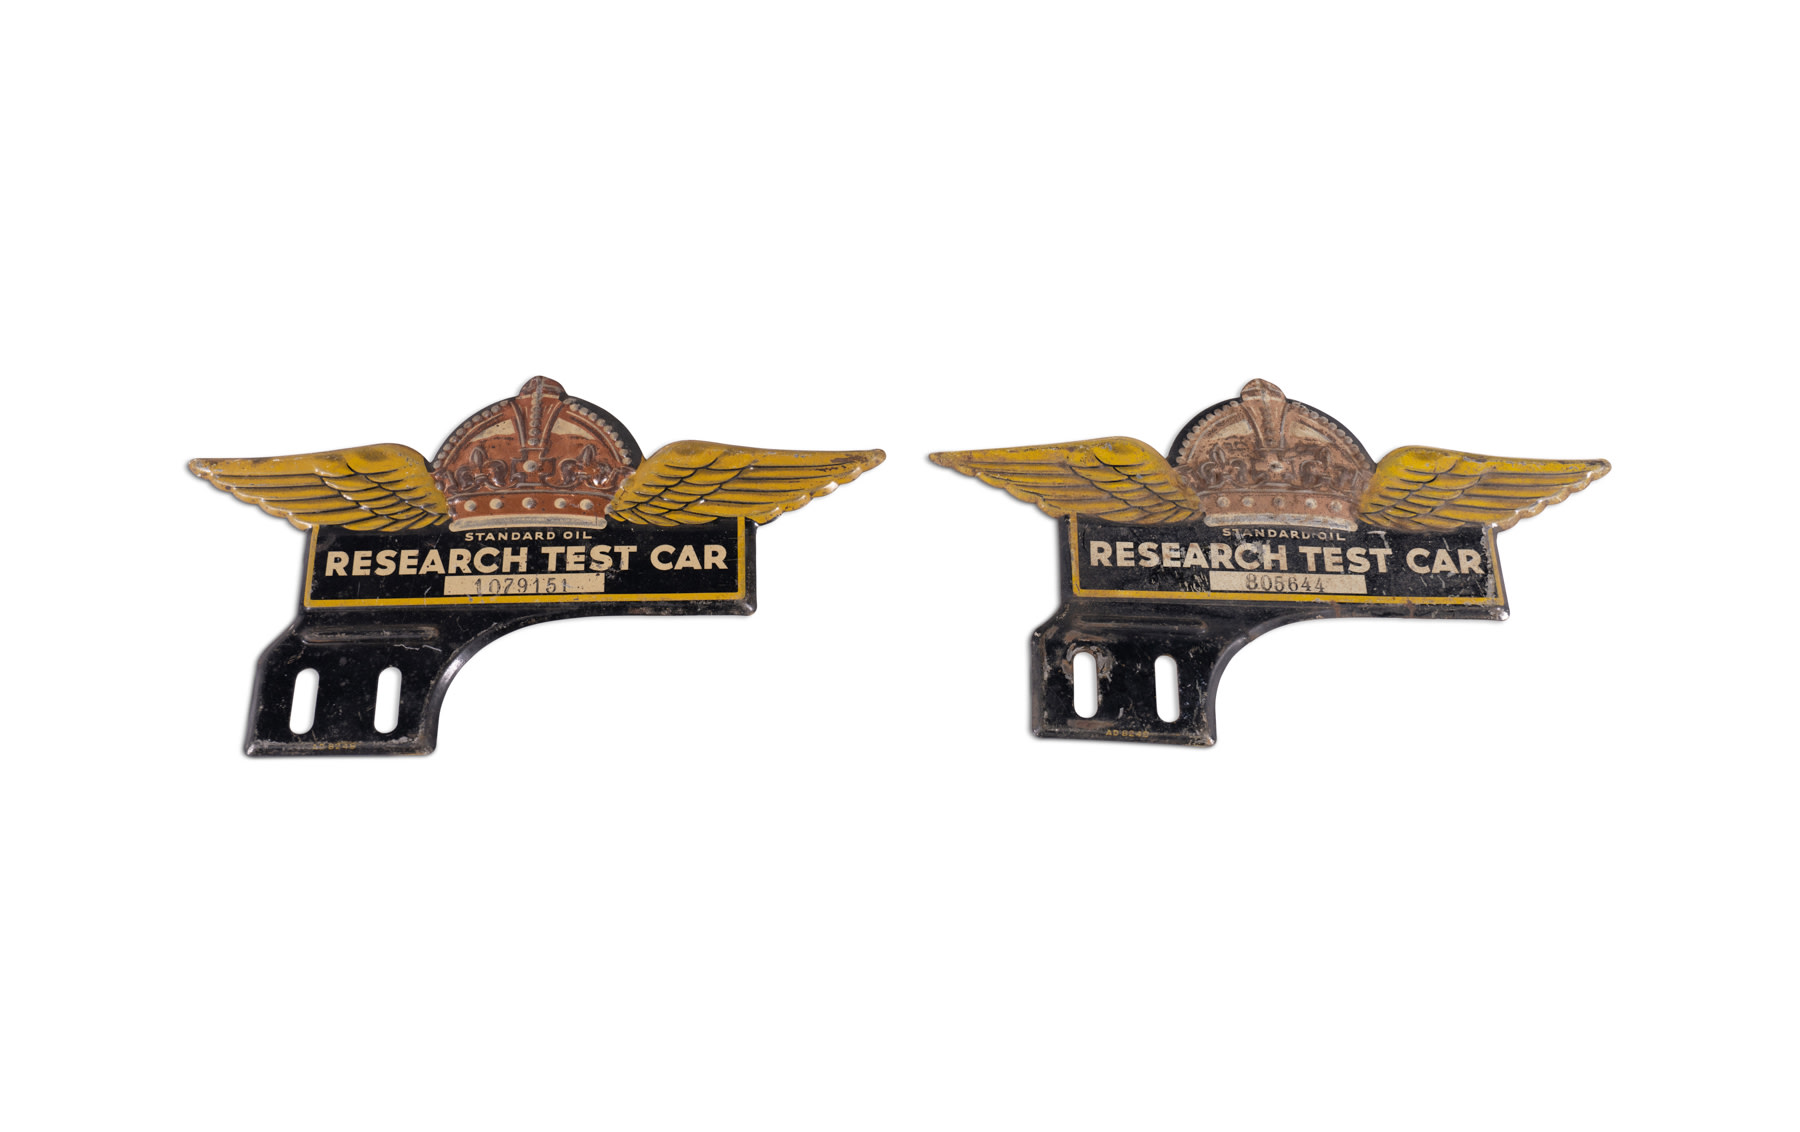 Standard Oil Research Test Car License Plate Toppers